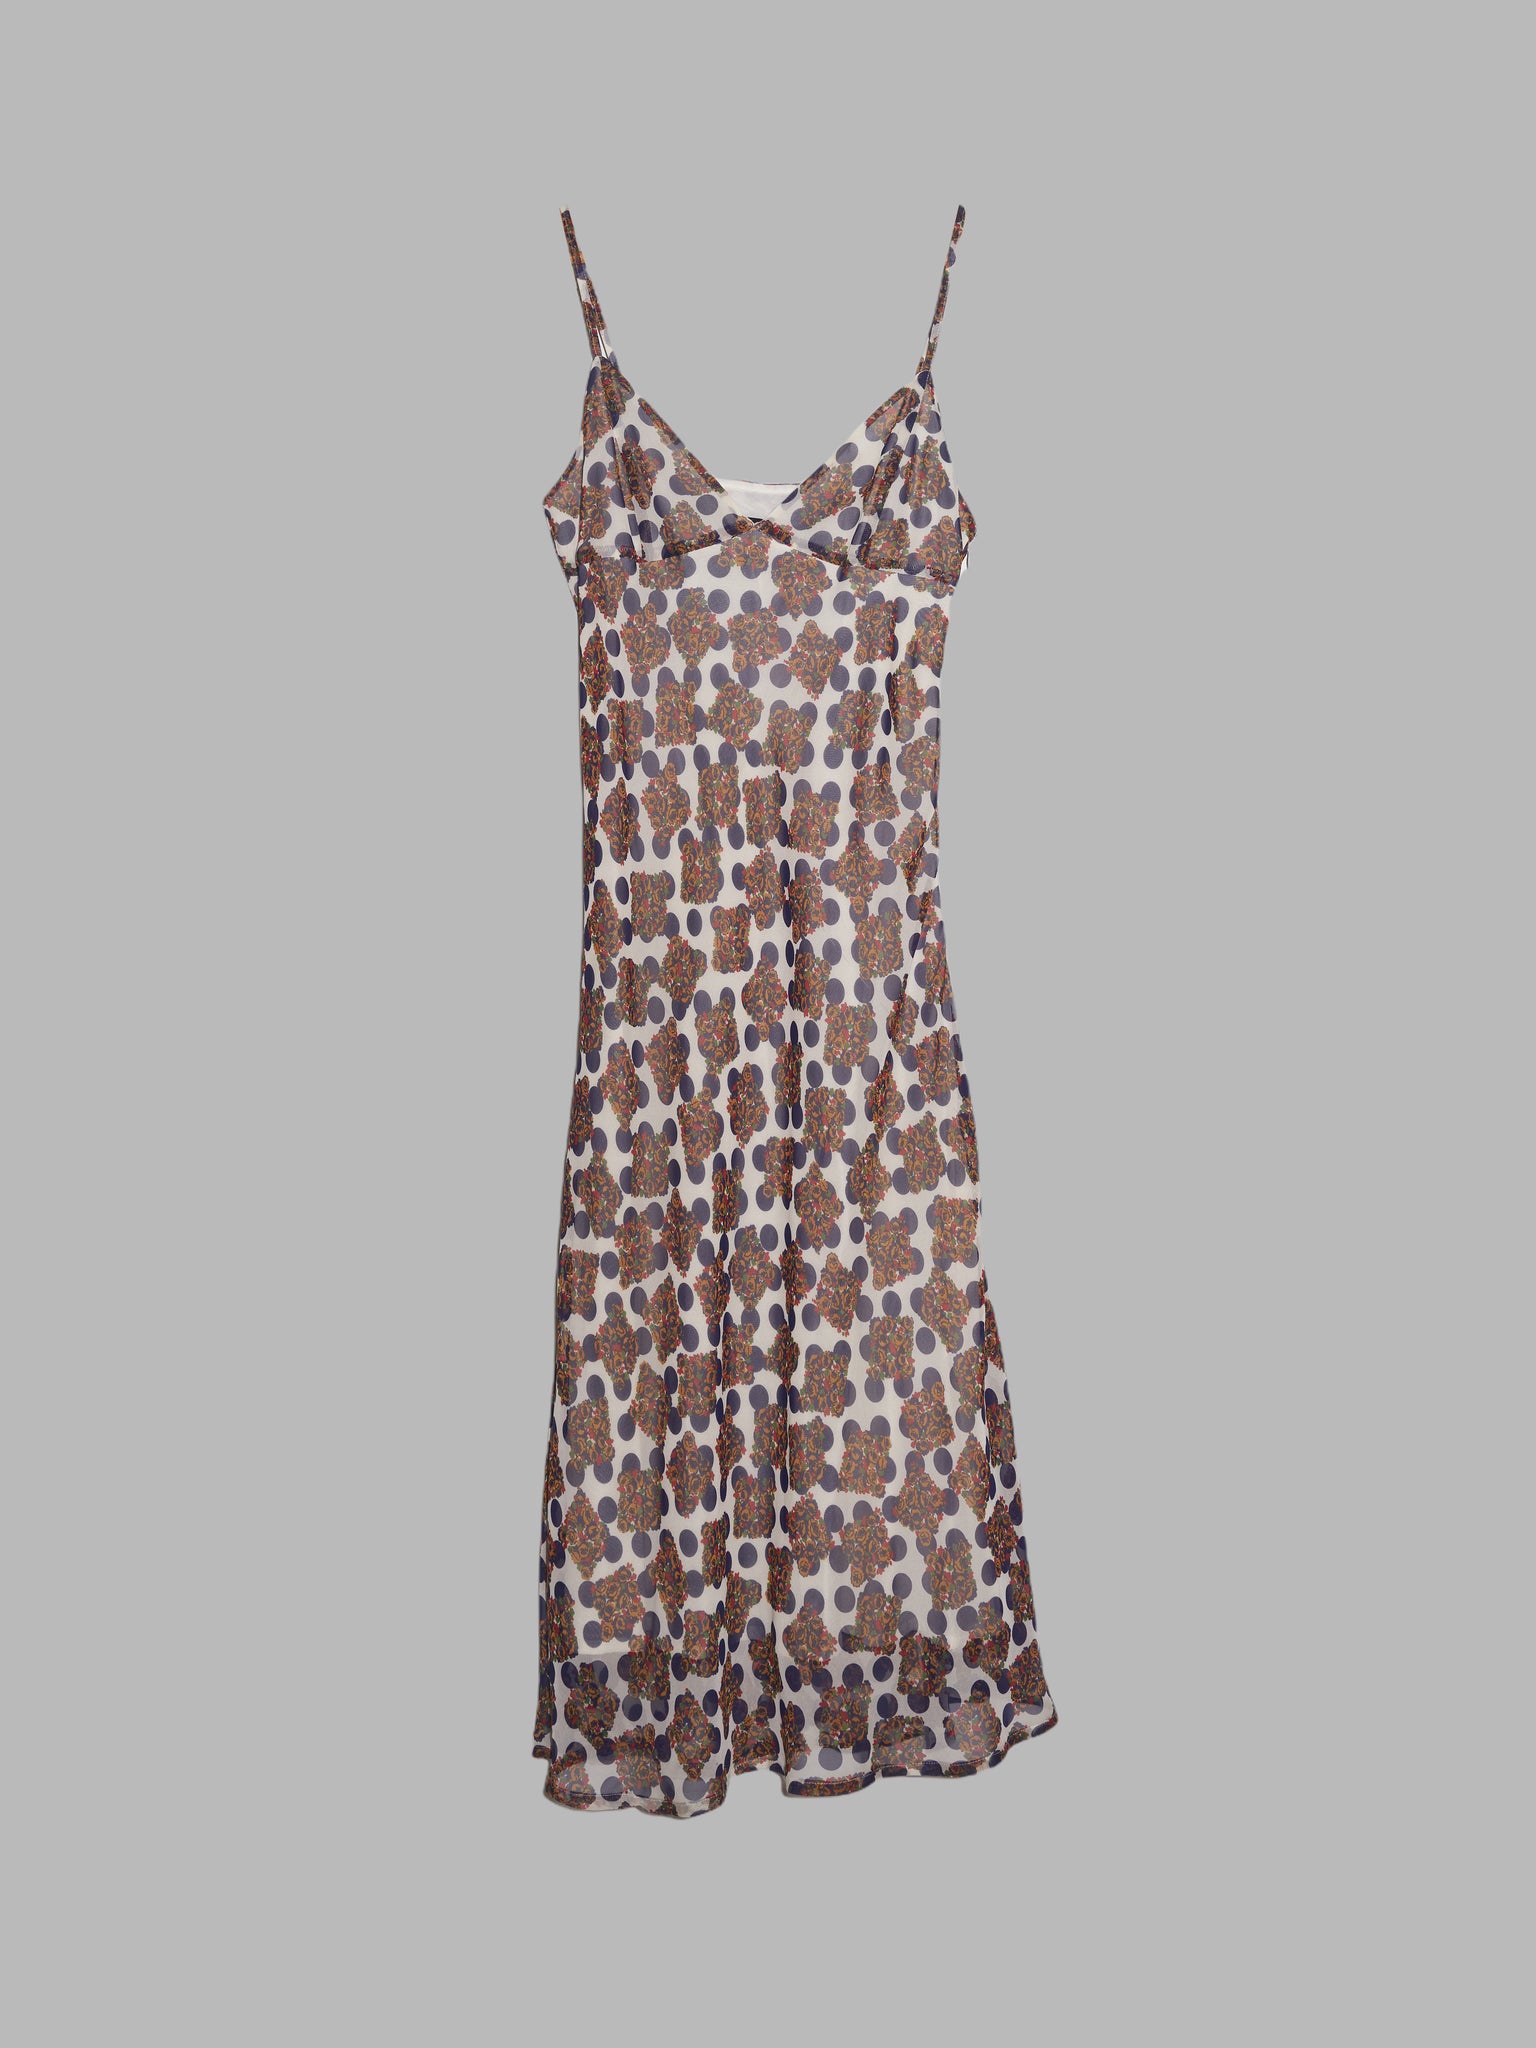 Tricot Comme des Garcons 2003 sheer printed slip dress with off-white lining